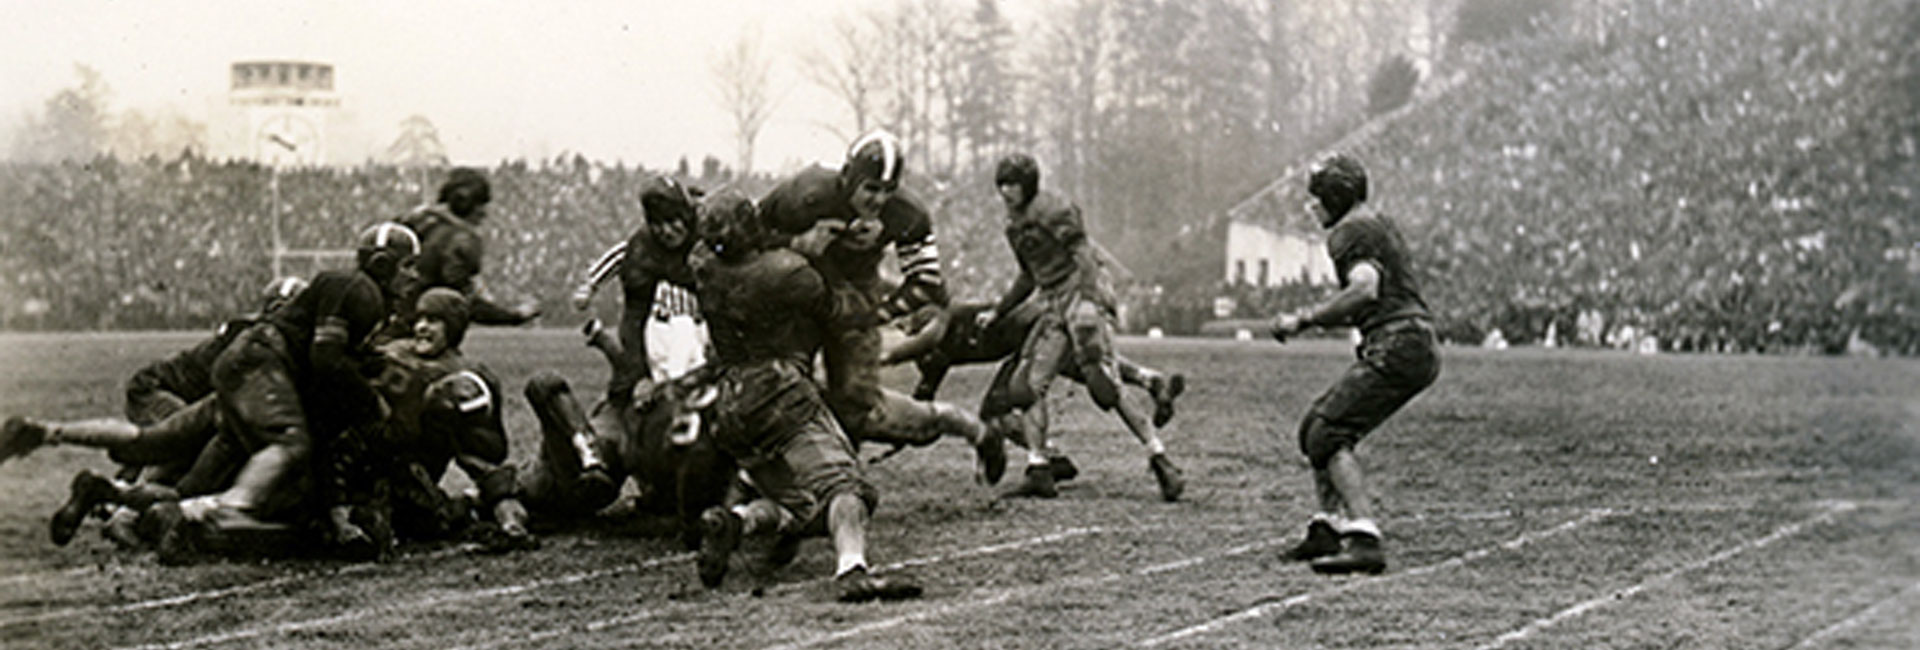 Old football game photo